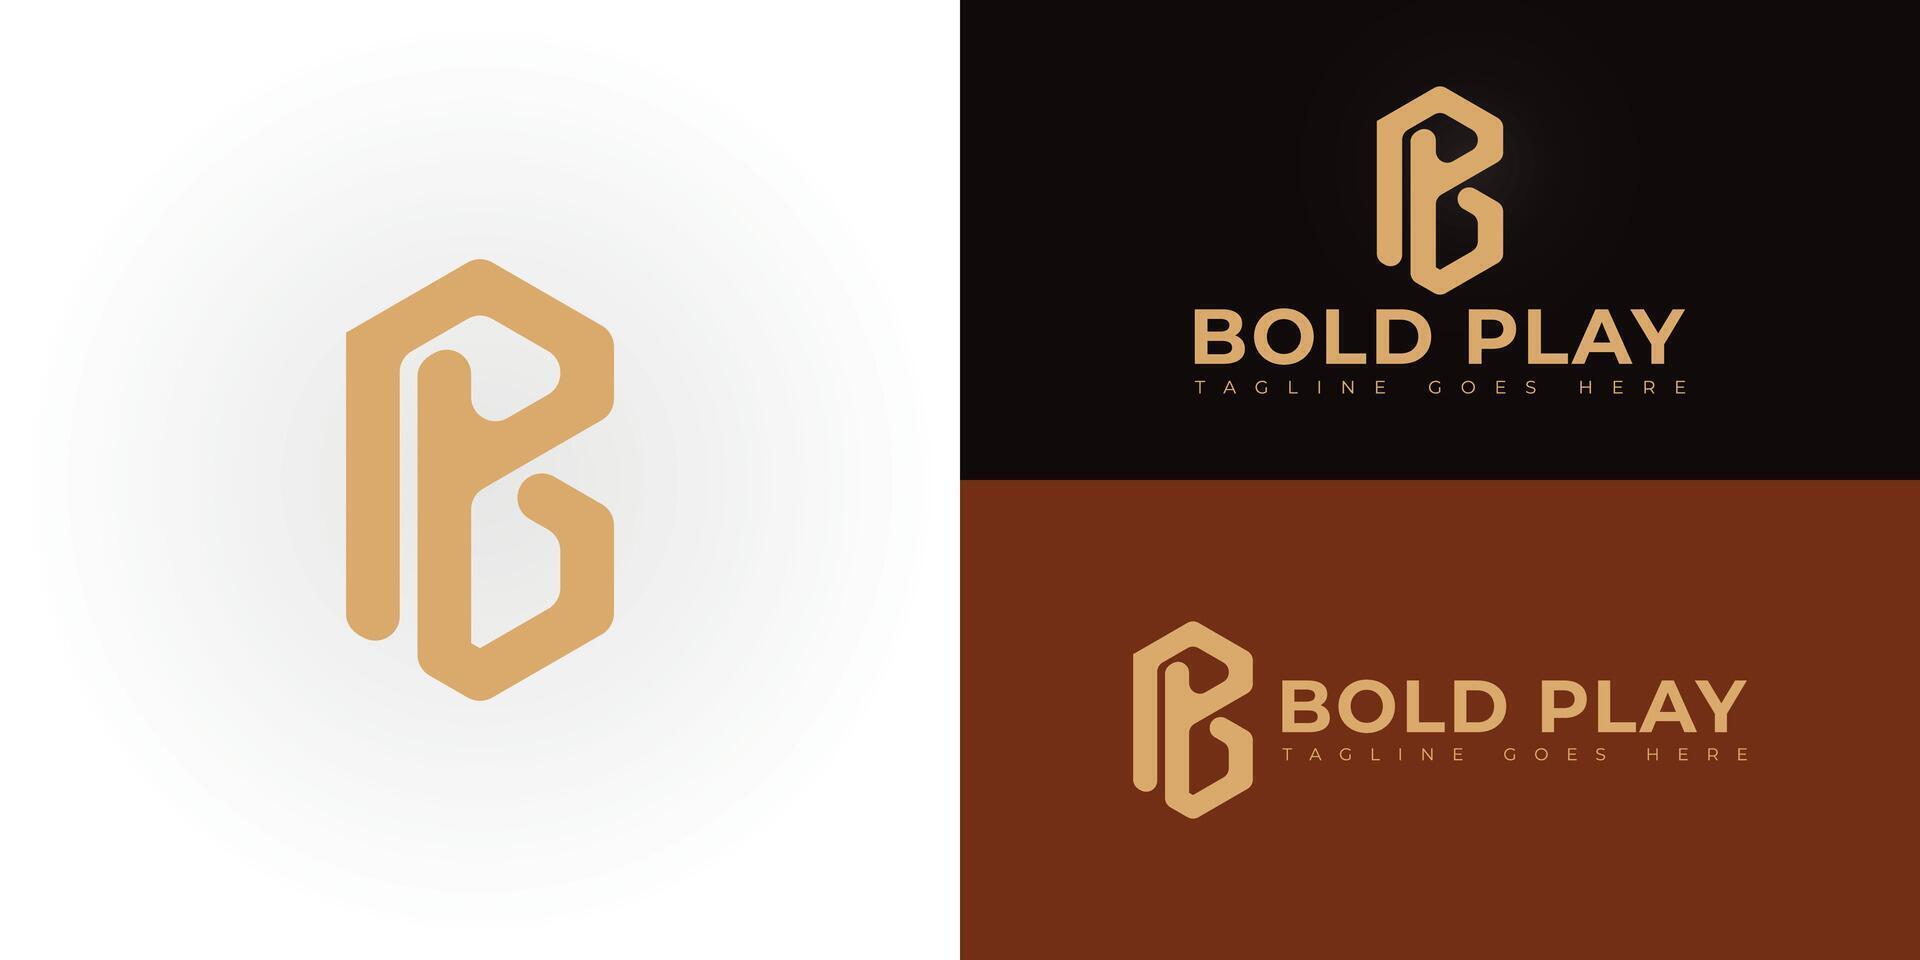 Abstract initial hexagon letters BP or PB logo in luxury gold color isolated on multiple background colors. The logo is suitable for art business company logo design illustration inspiration vector